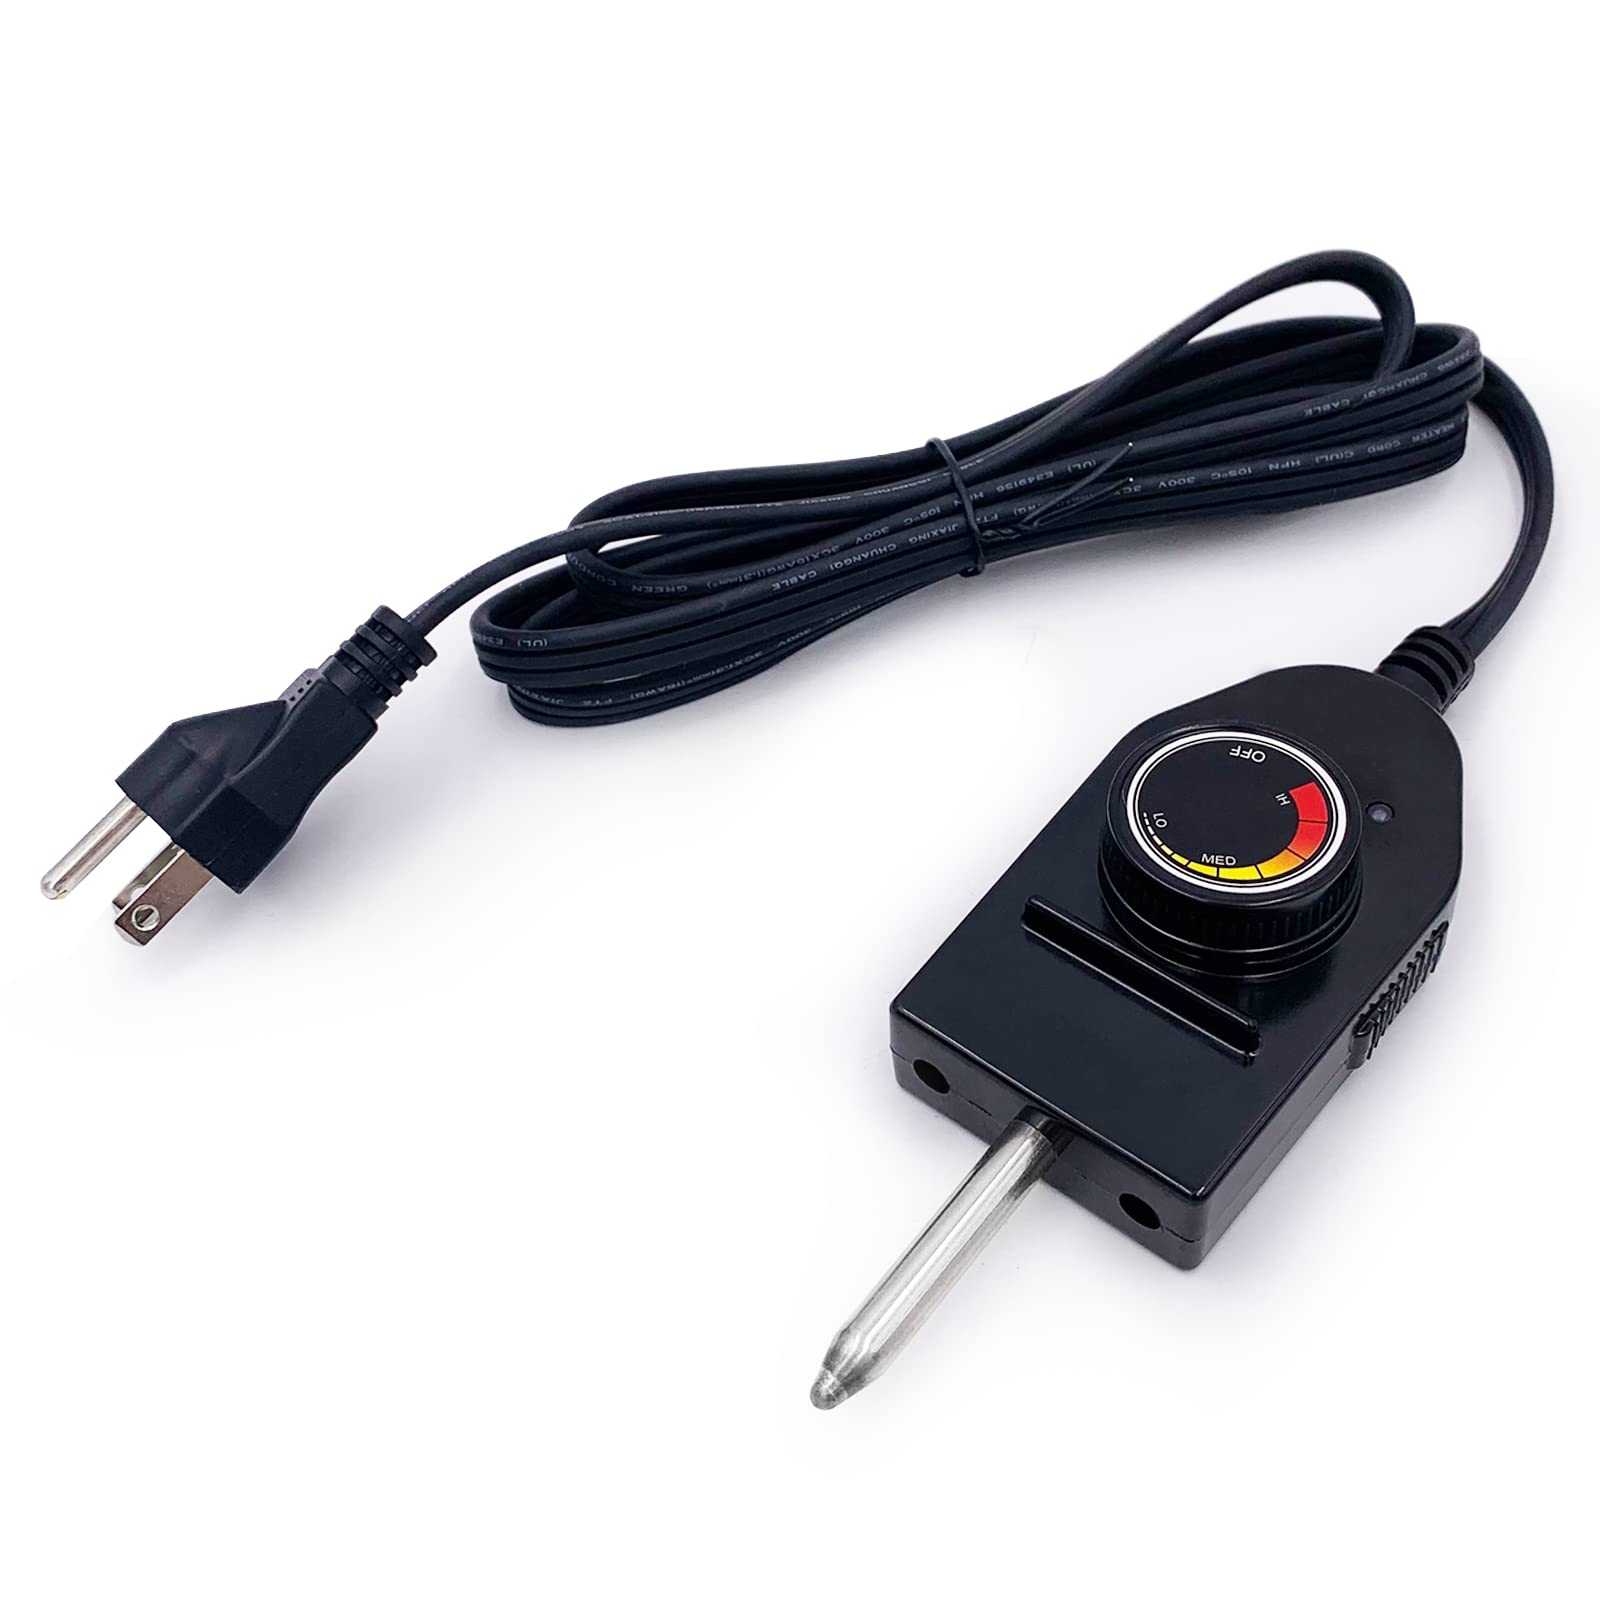 Analog Control Power Cord with temperature control knob for Masterbuilt Electric Smoker-YAOAWE